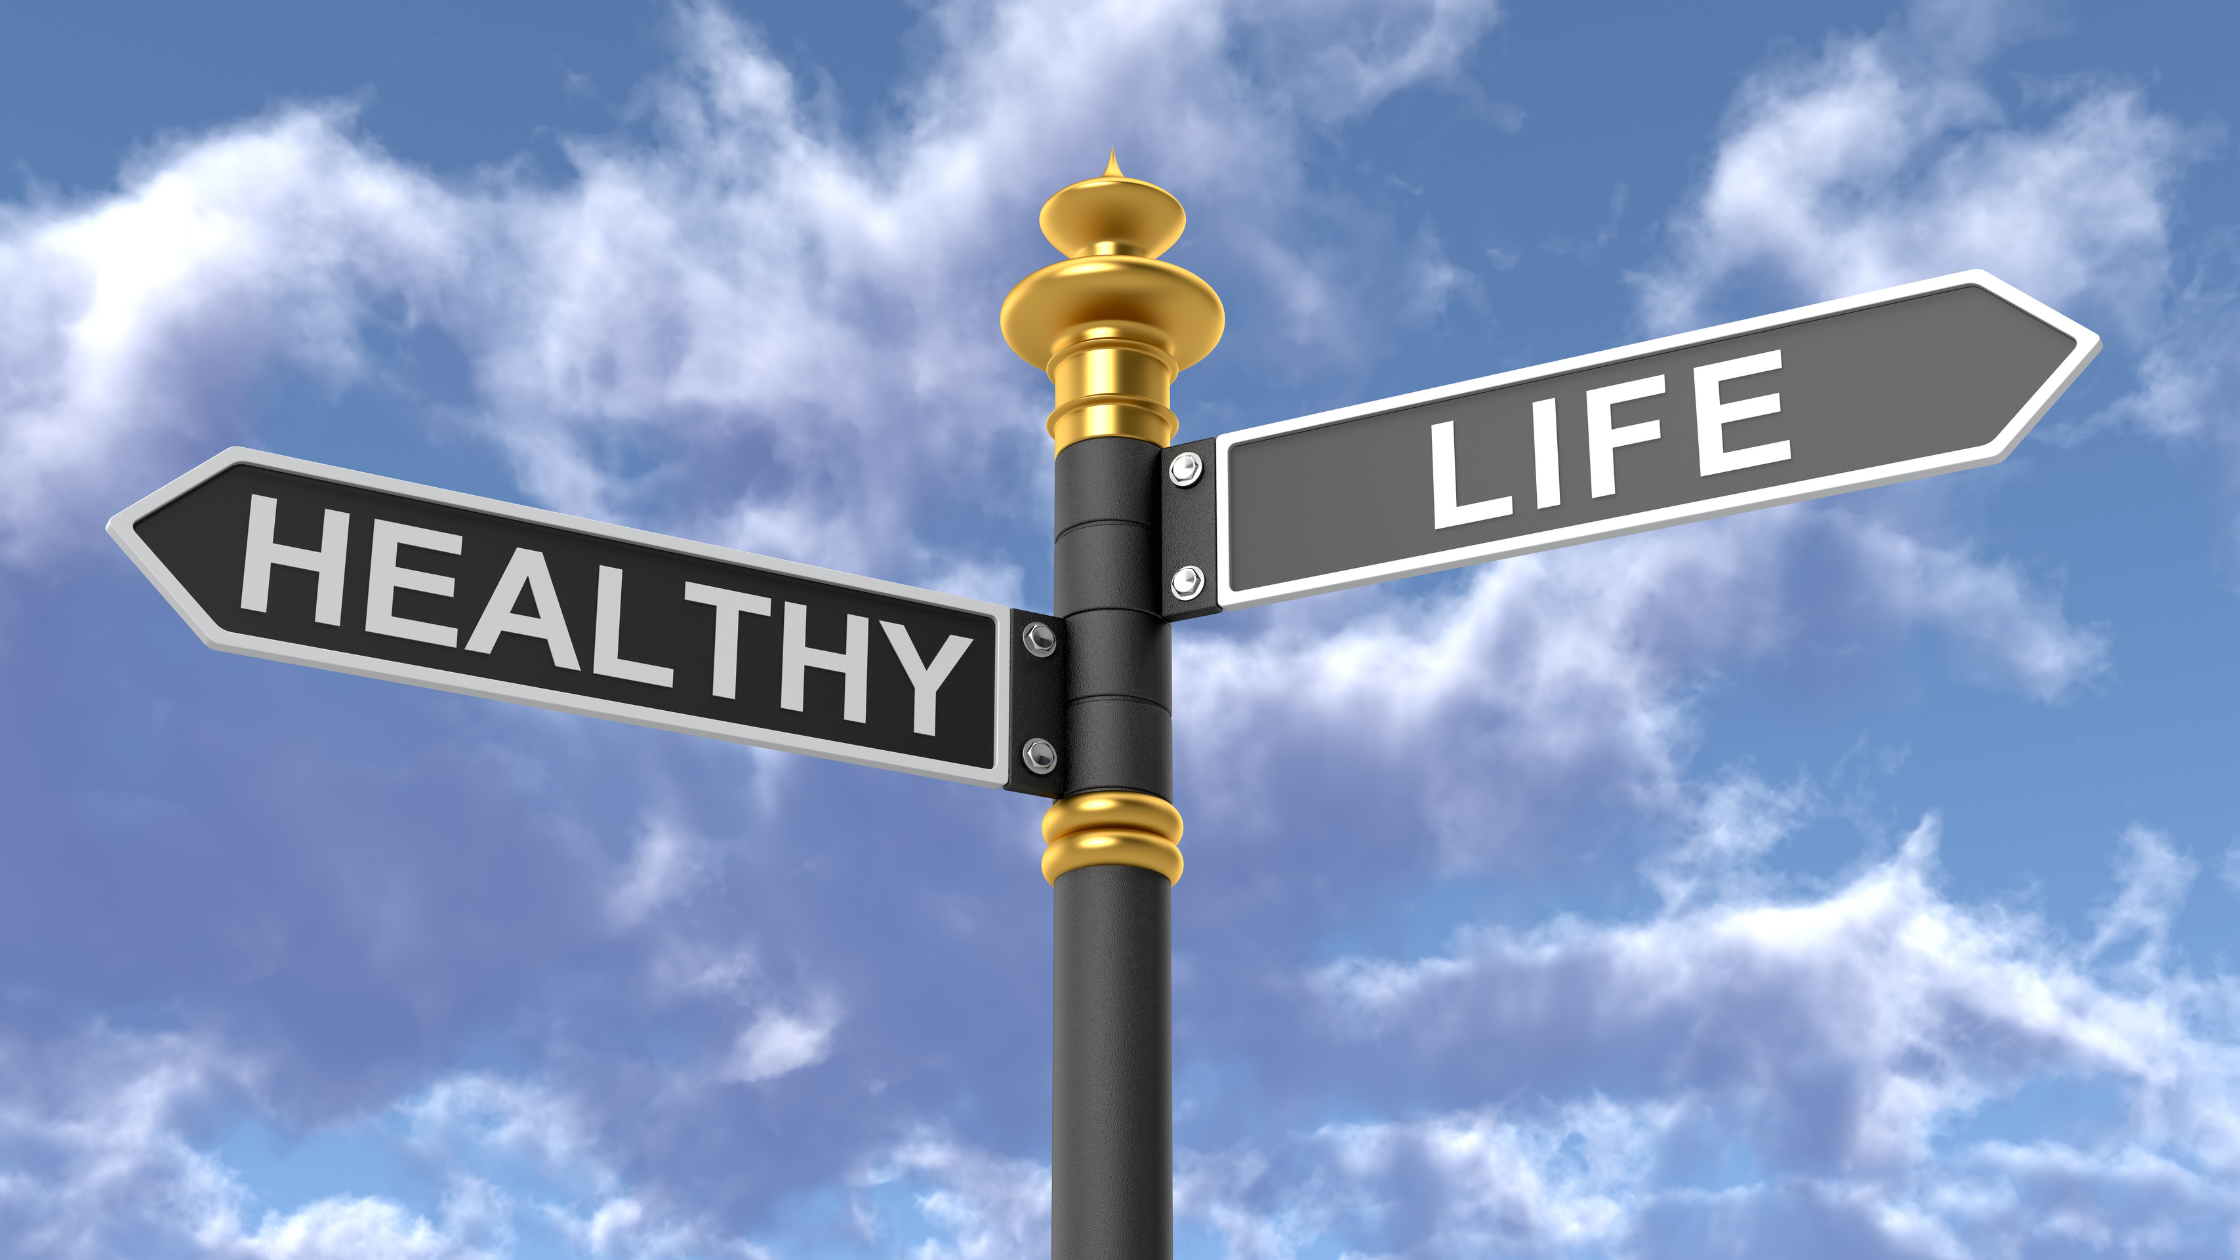 signpost reading "healthy life"